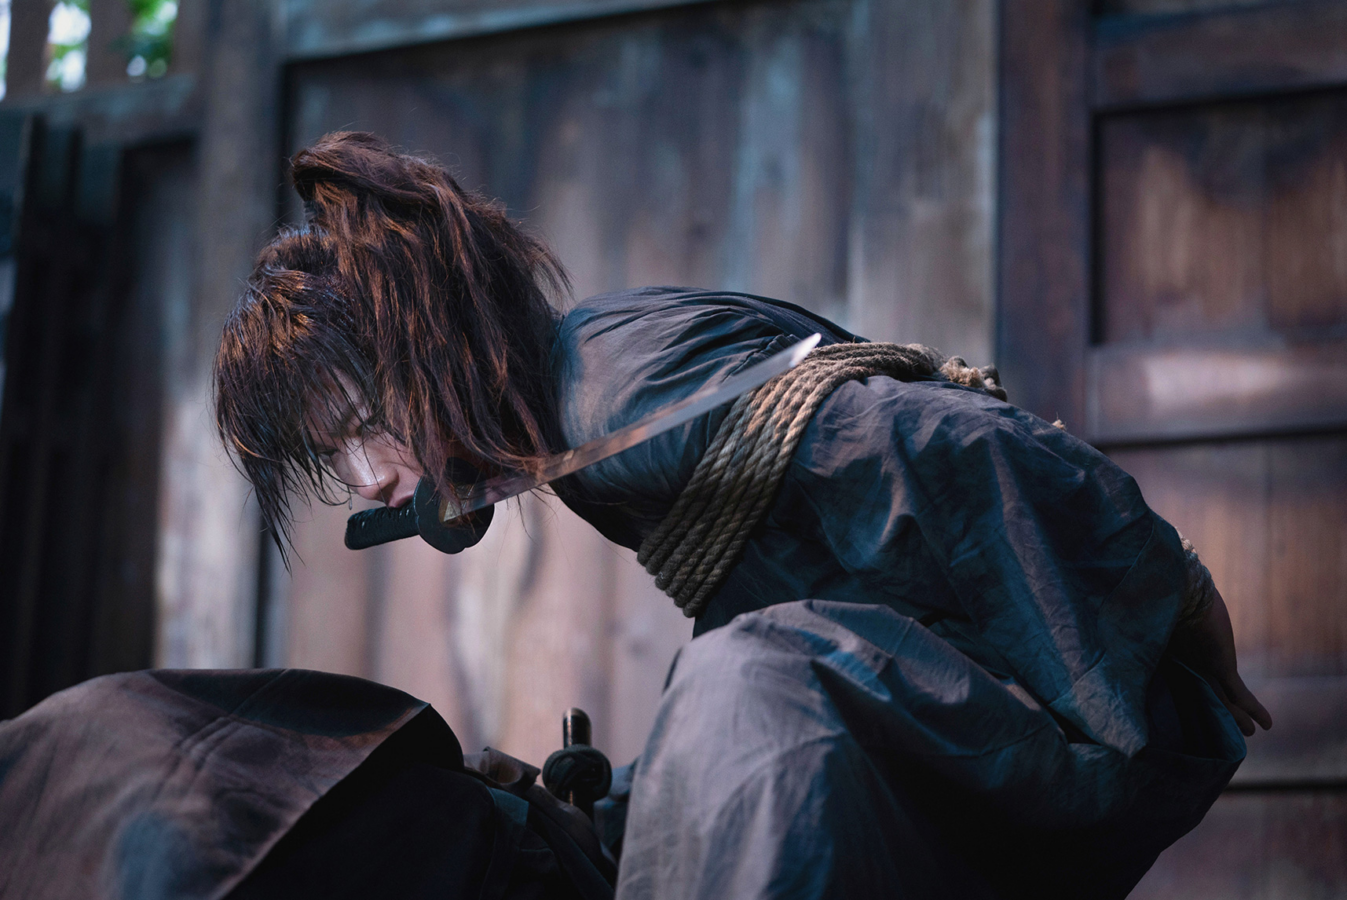 Watch the New Preview for Rurouni Kenshin: The Beginning